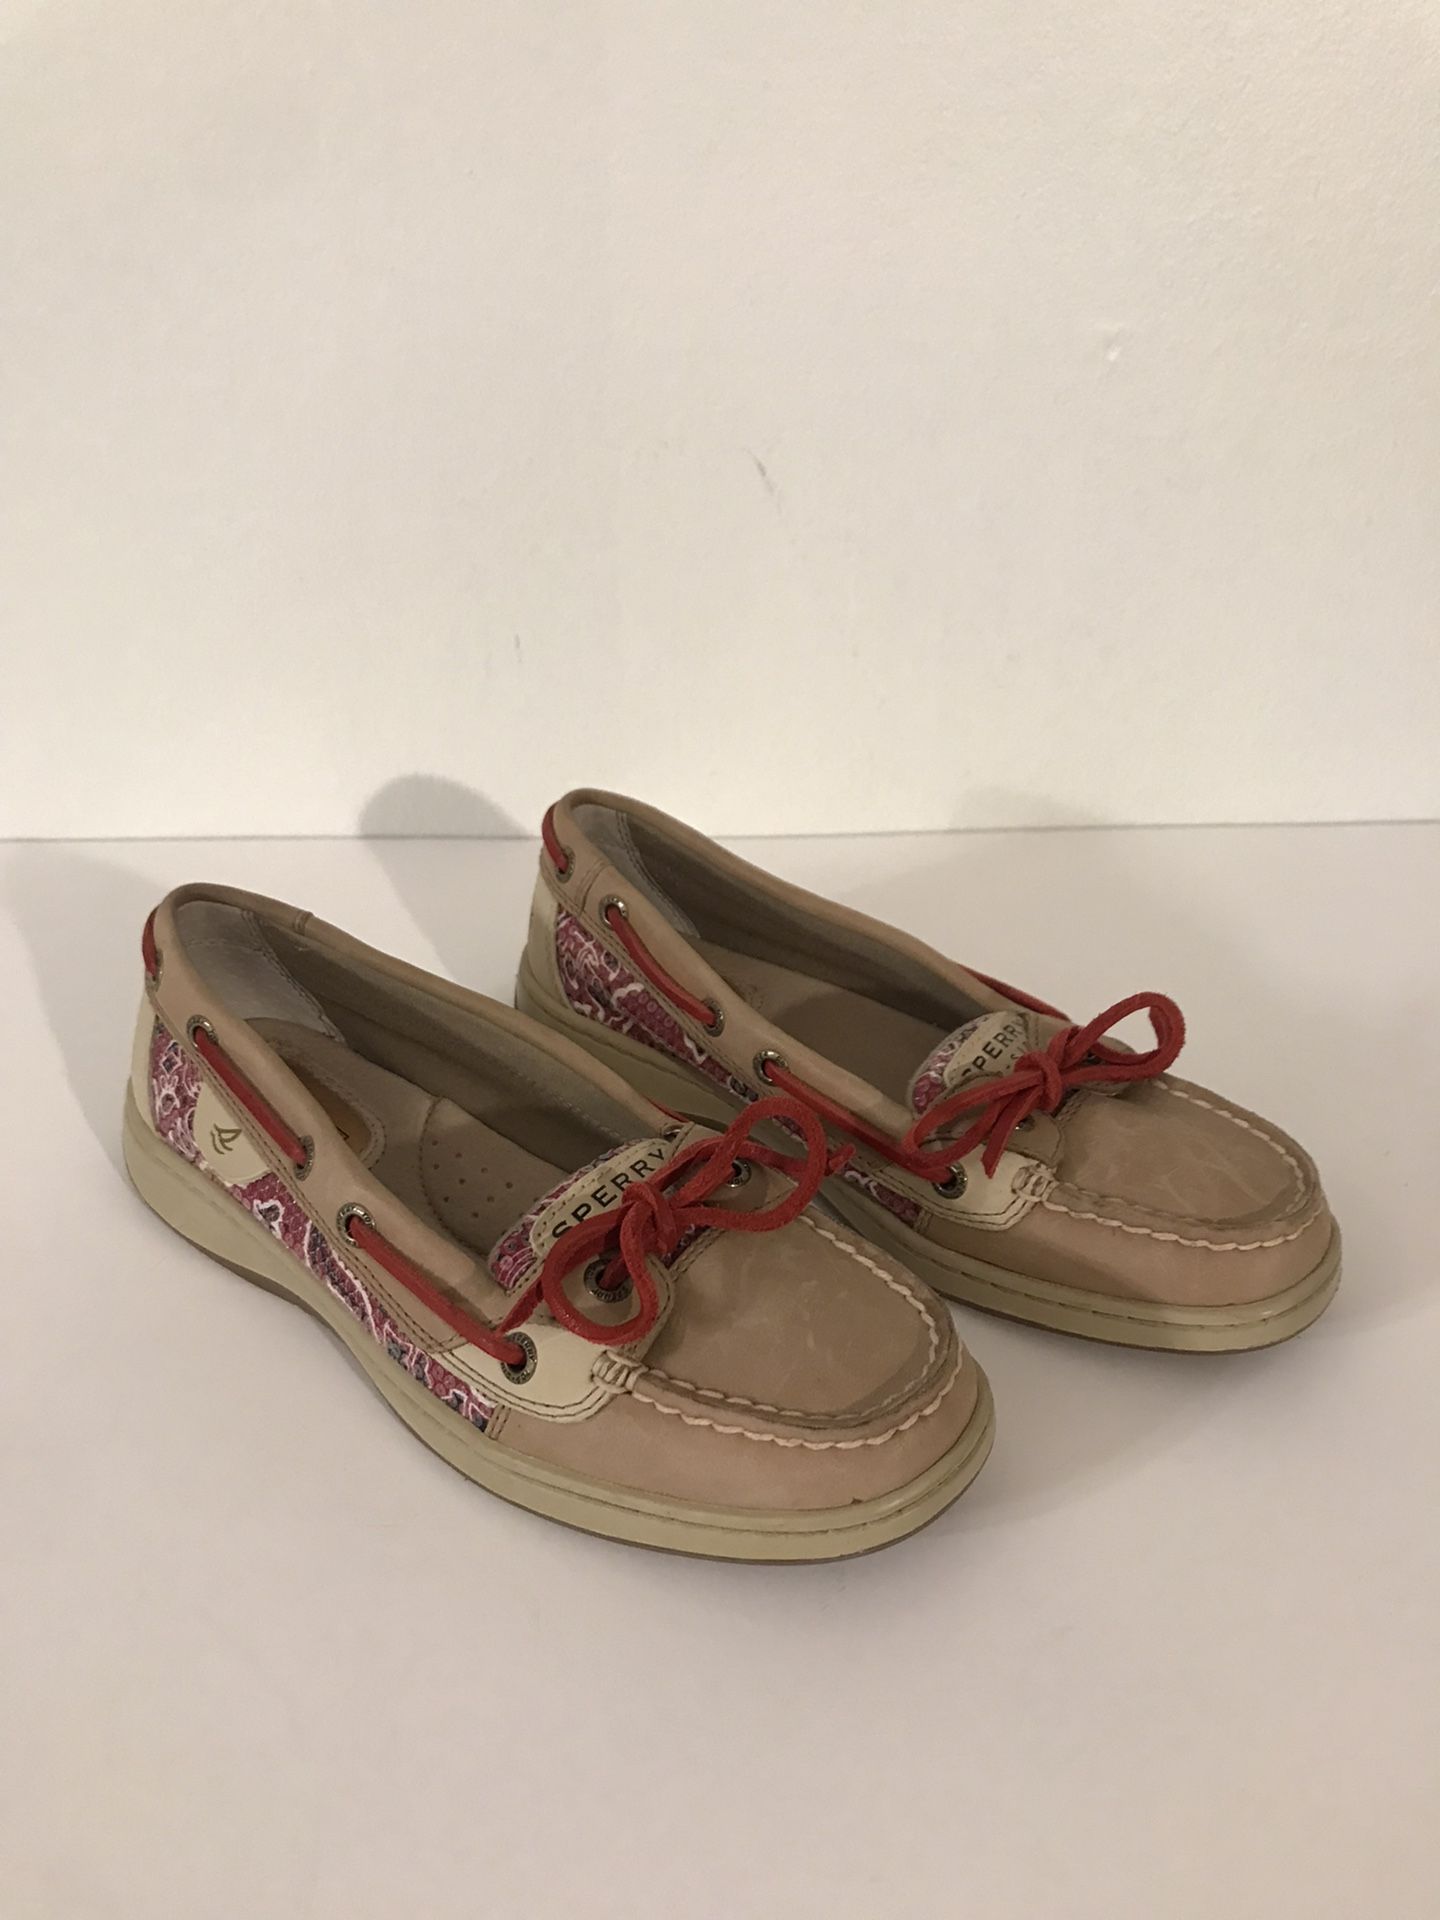 Sperry Top-Sider Angelfish Sequin & Red Paisley Print Leather Boat Shoes Size 6M